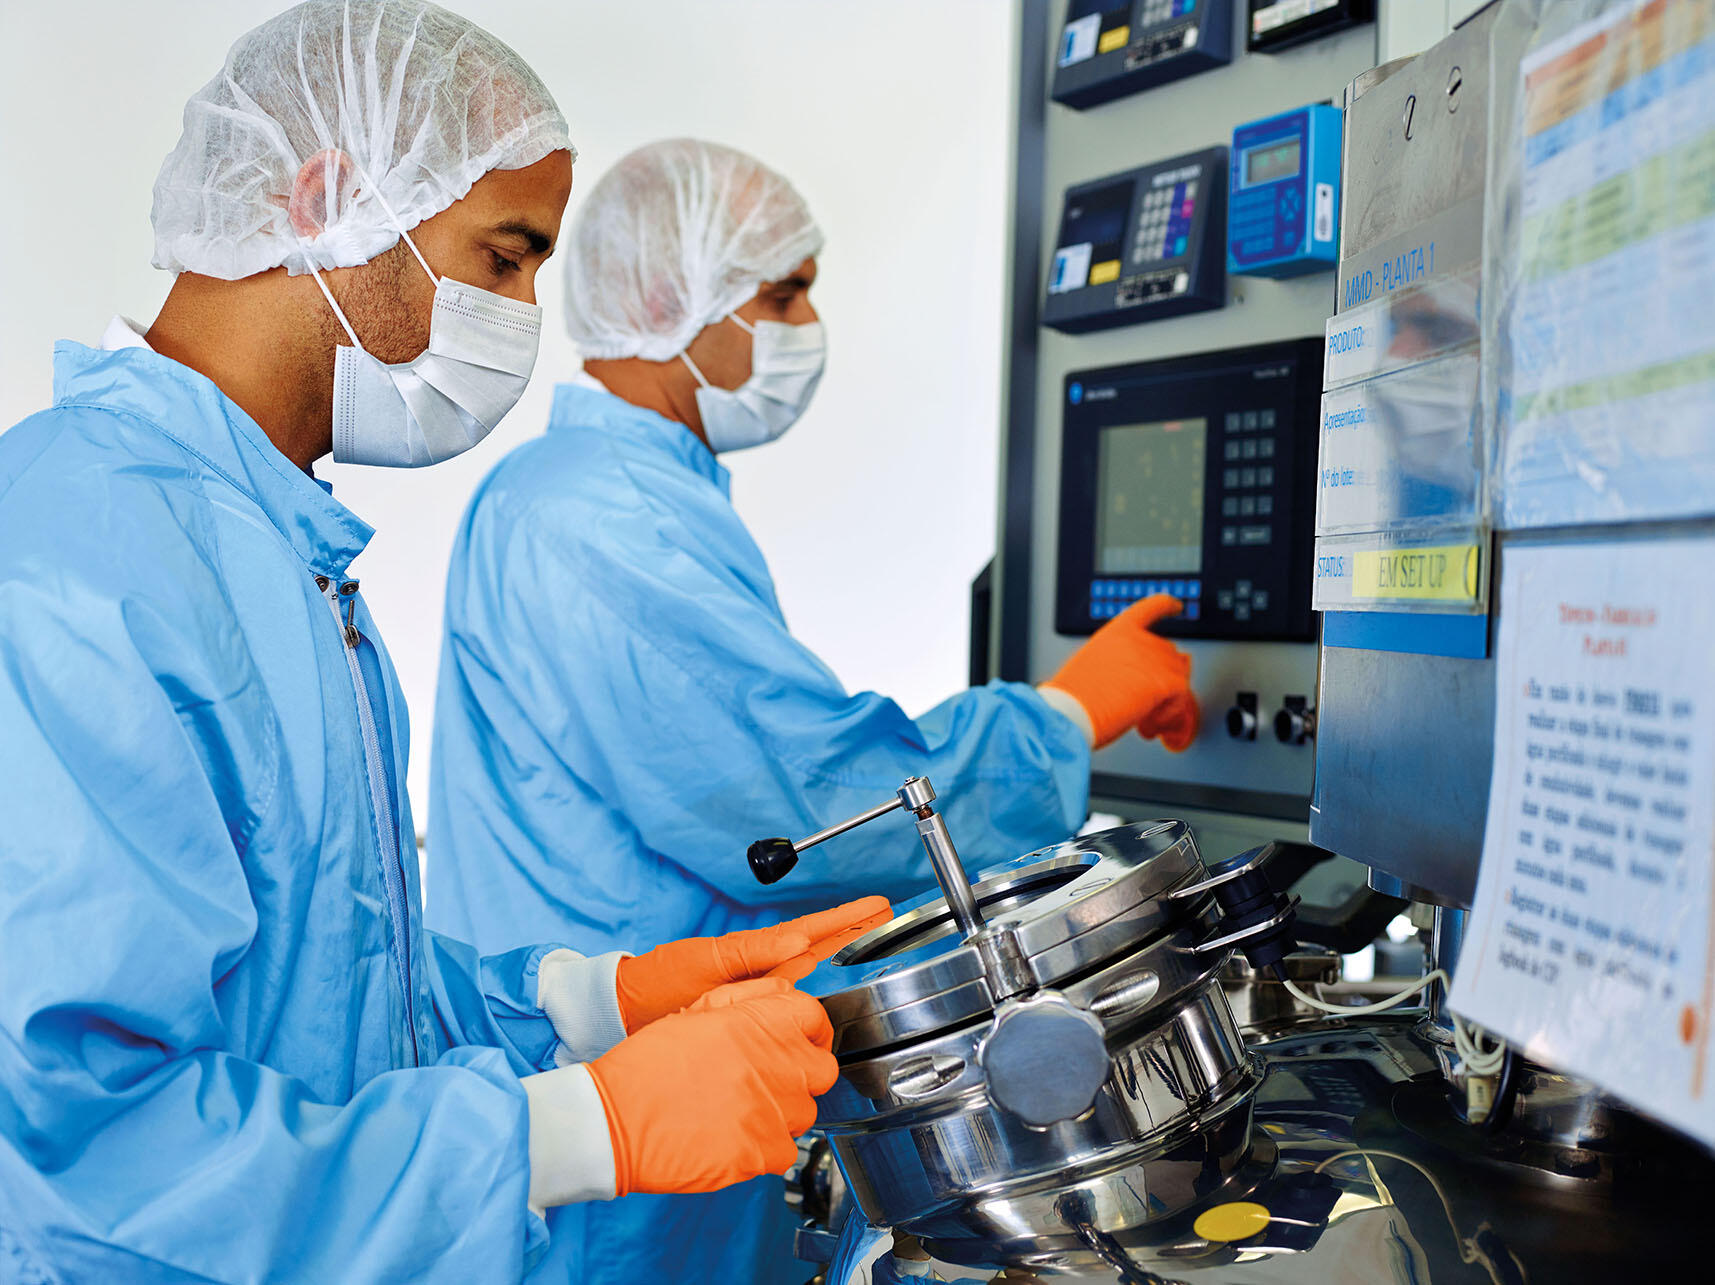 Workers produce generic pharmaceuticals at a factory in Brazil. (Photo courtesy of GlaxoSmithKline.)